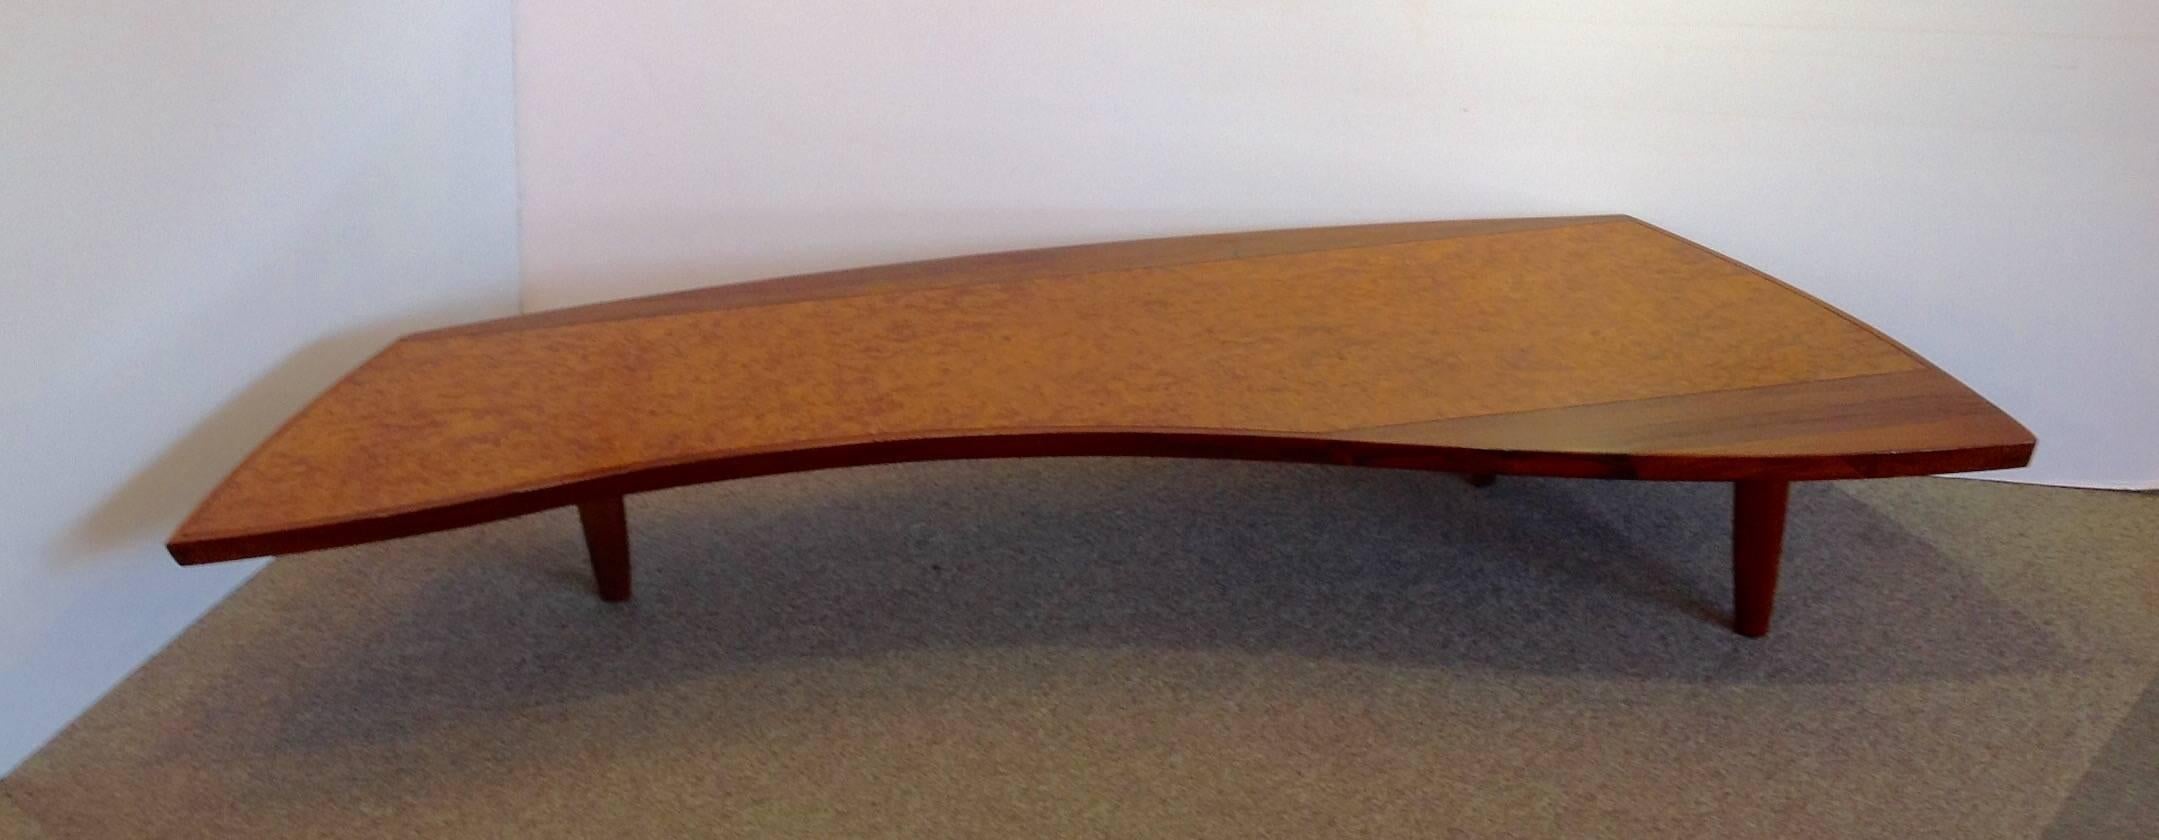 Mid-20th Century George Nakashima Coffee Table for Widdicomb For Sale